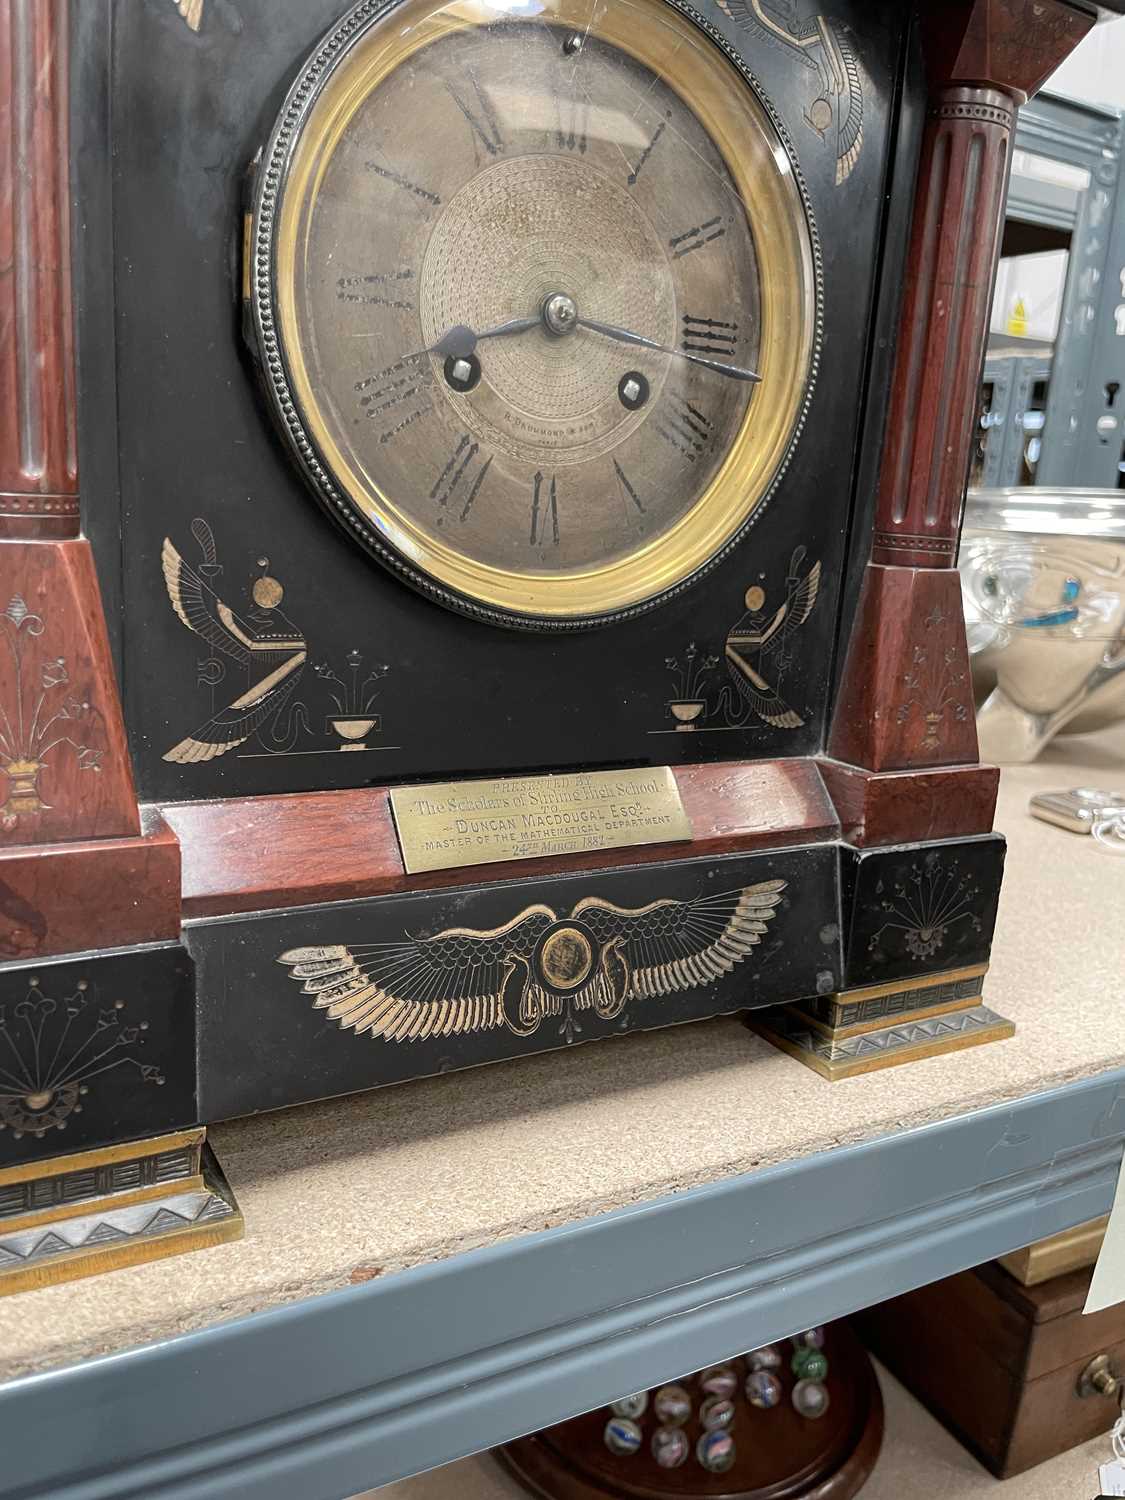 AN EGYPTIAN REVIVAL BRASS-MOUNTED, RED MARBLE AND POLISHED SLATE MANTEL CLOCK, 19TH CENTURY - Image 5 of 8